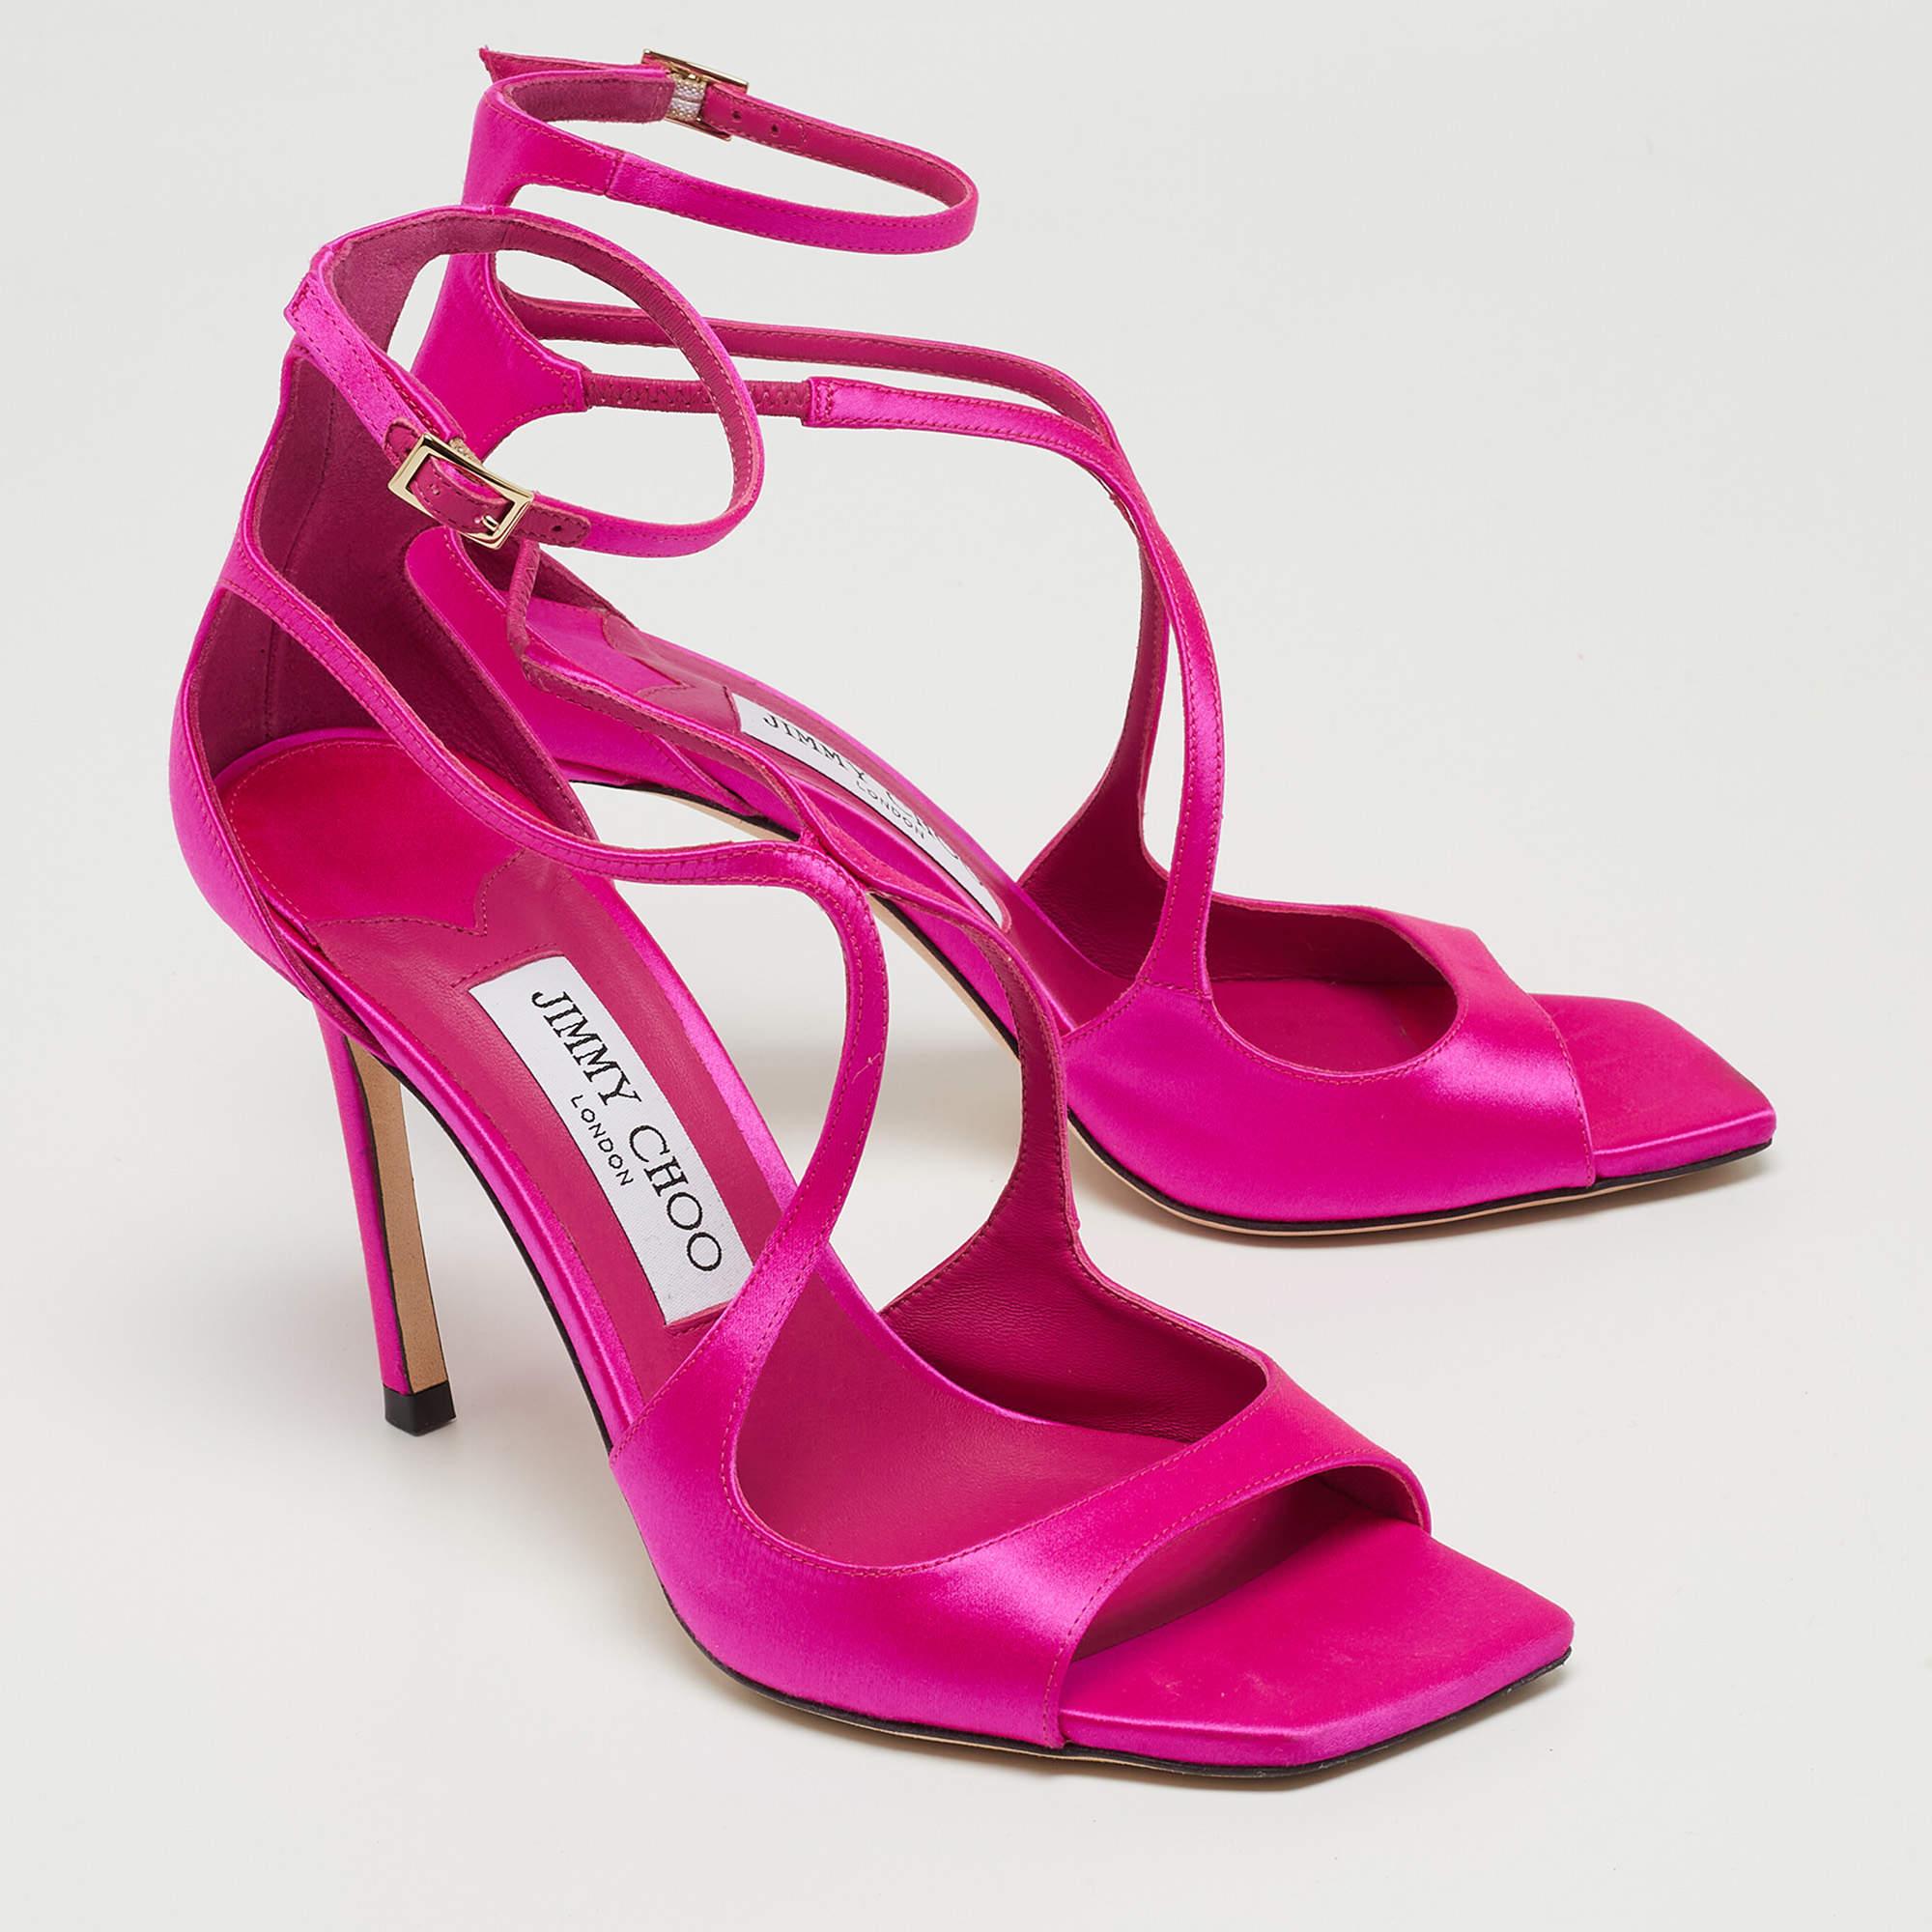 Women's Jimmy Choo Pink Satin Azia 95 Ankle Strap Sandals Size 36.5 For Sale